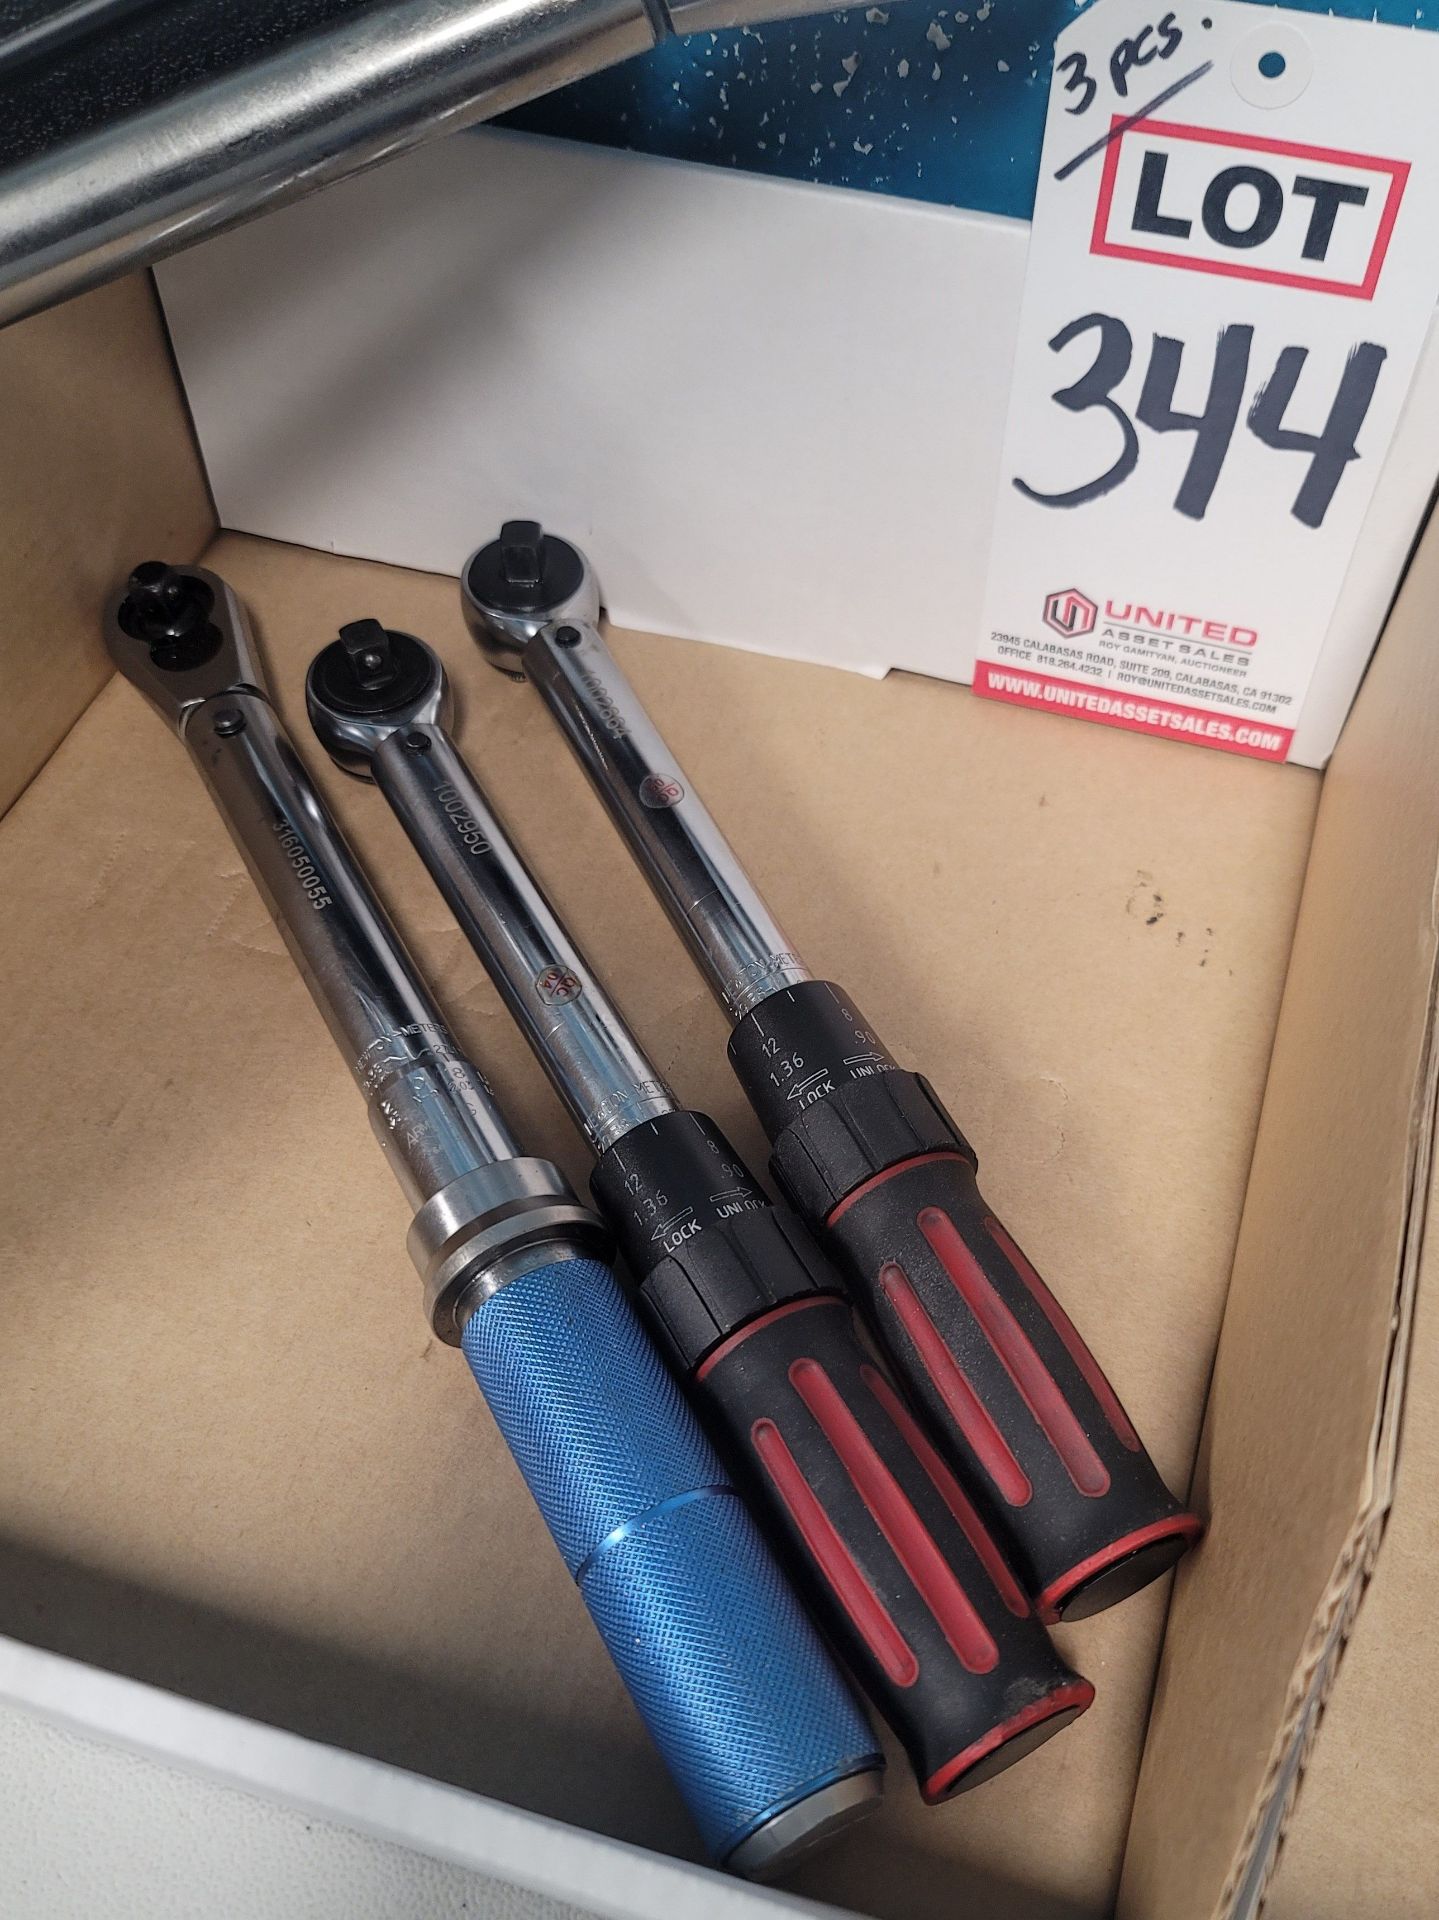 LOT - (3) TORQUE WRENCHES: (1) ARMSTRONG 64-041N AND (2) PERFORMANCE TOOL 3/8" DRIVE TORQUE